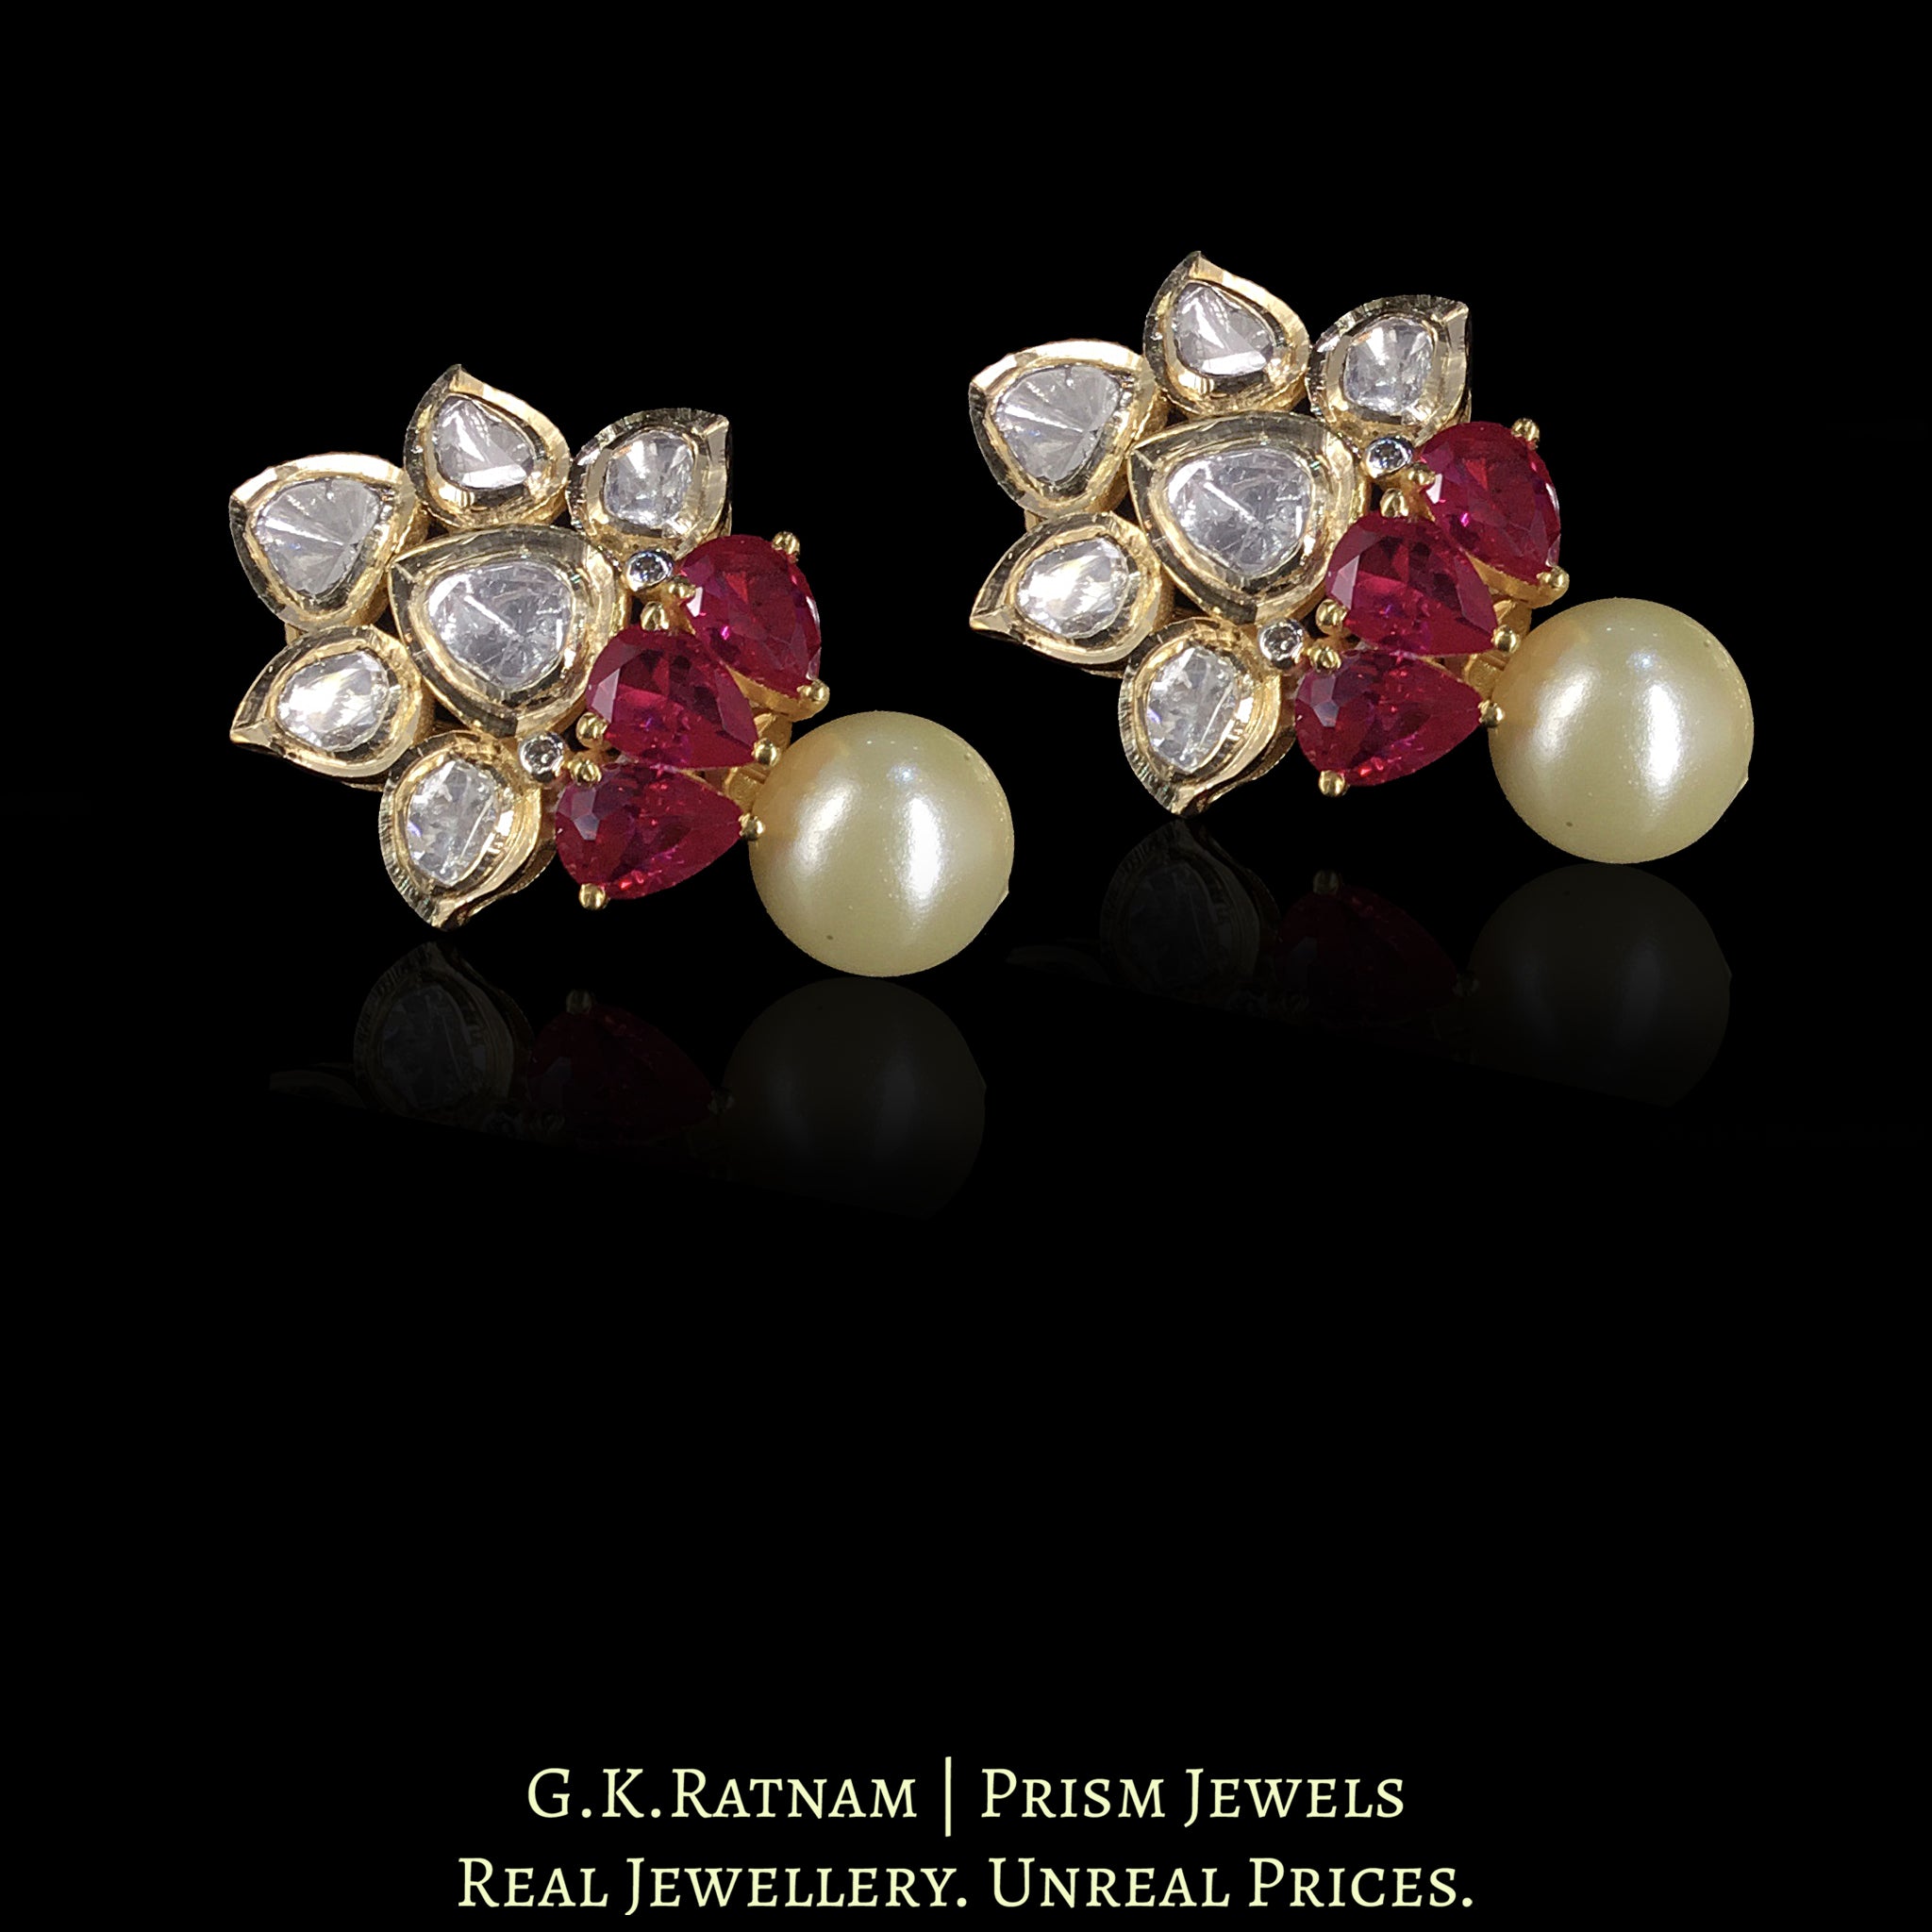 18k Gold and Diamond Polki Open Setting floral Tops / Studs Earring Pair with Rubies and Pearls